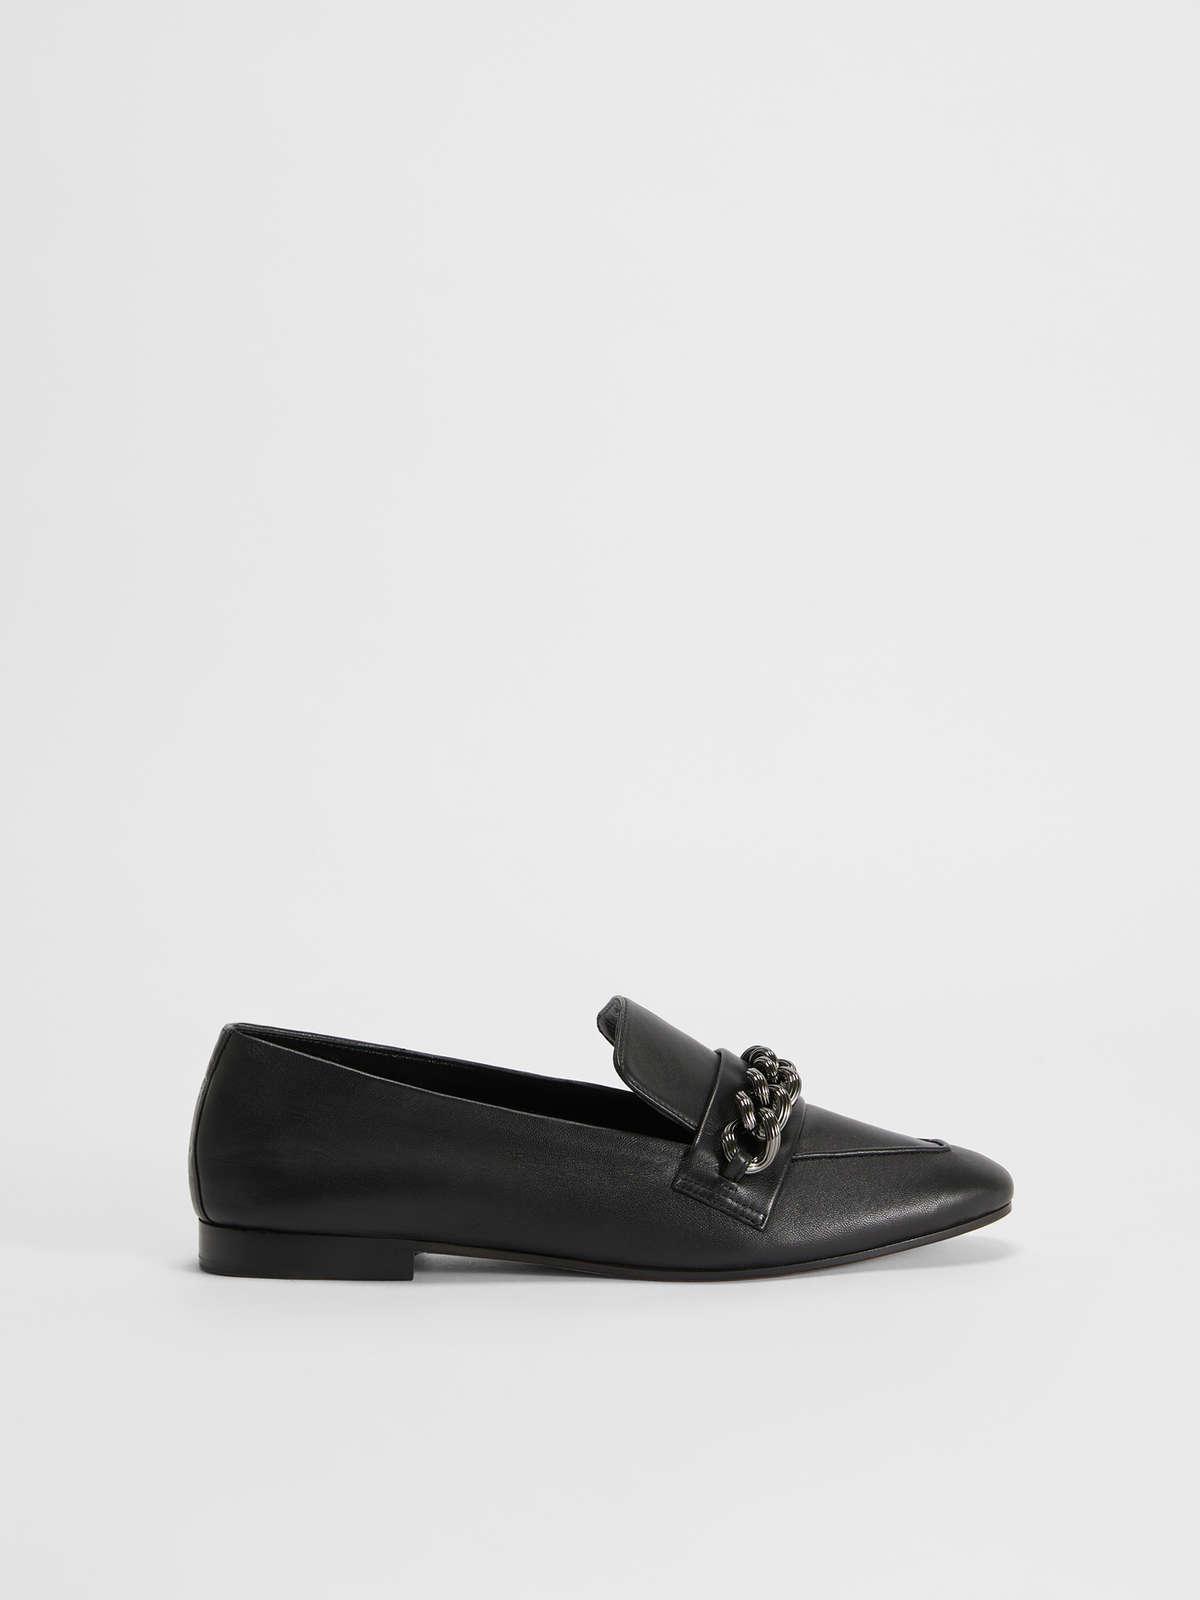 Womens Max Mara Flat Shoes | Nappa Leather Loafers Black